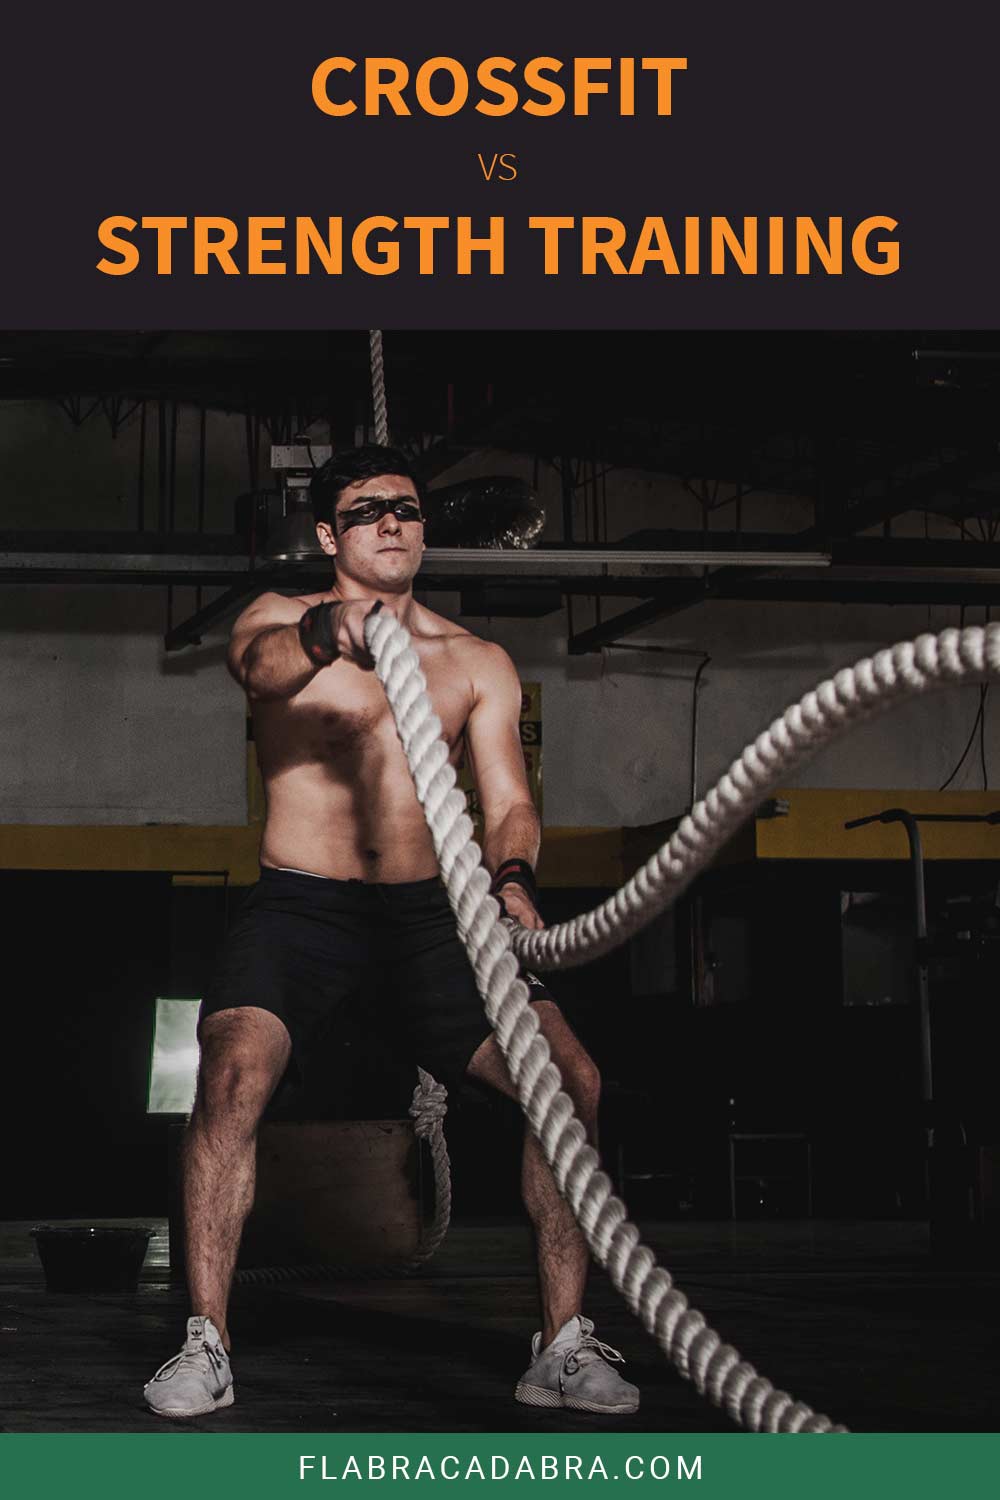 Man doing battle rope workout - CrossFit vs. Strength Training.